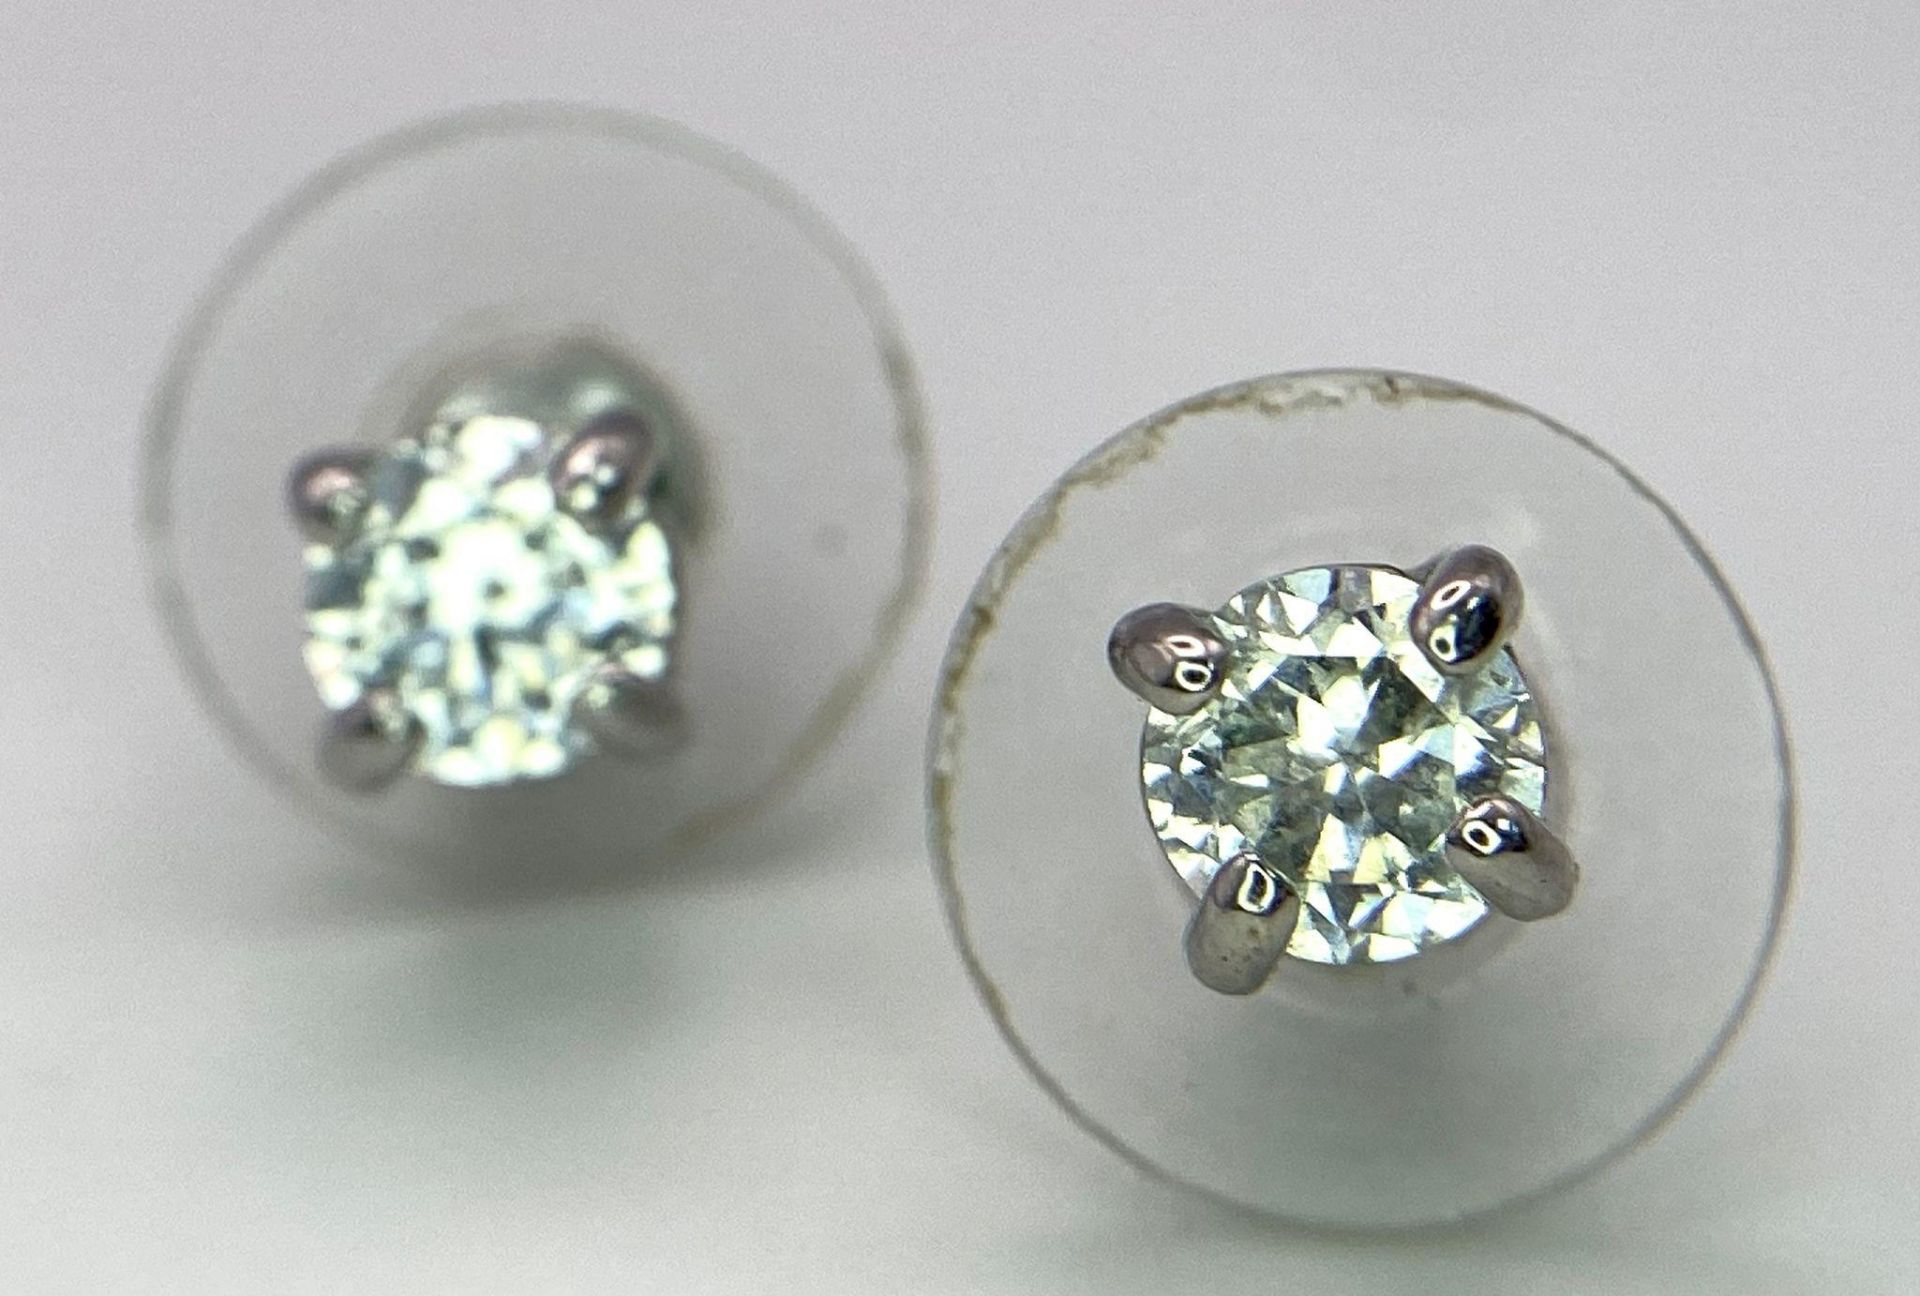 A Pair of White CZ Stone Stud Earrings.